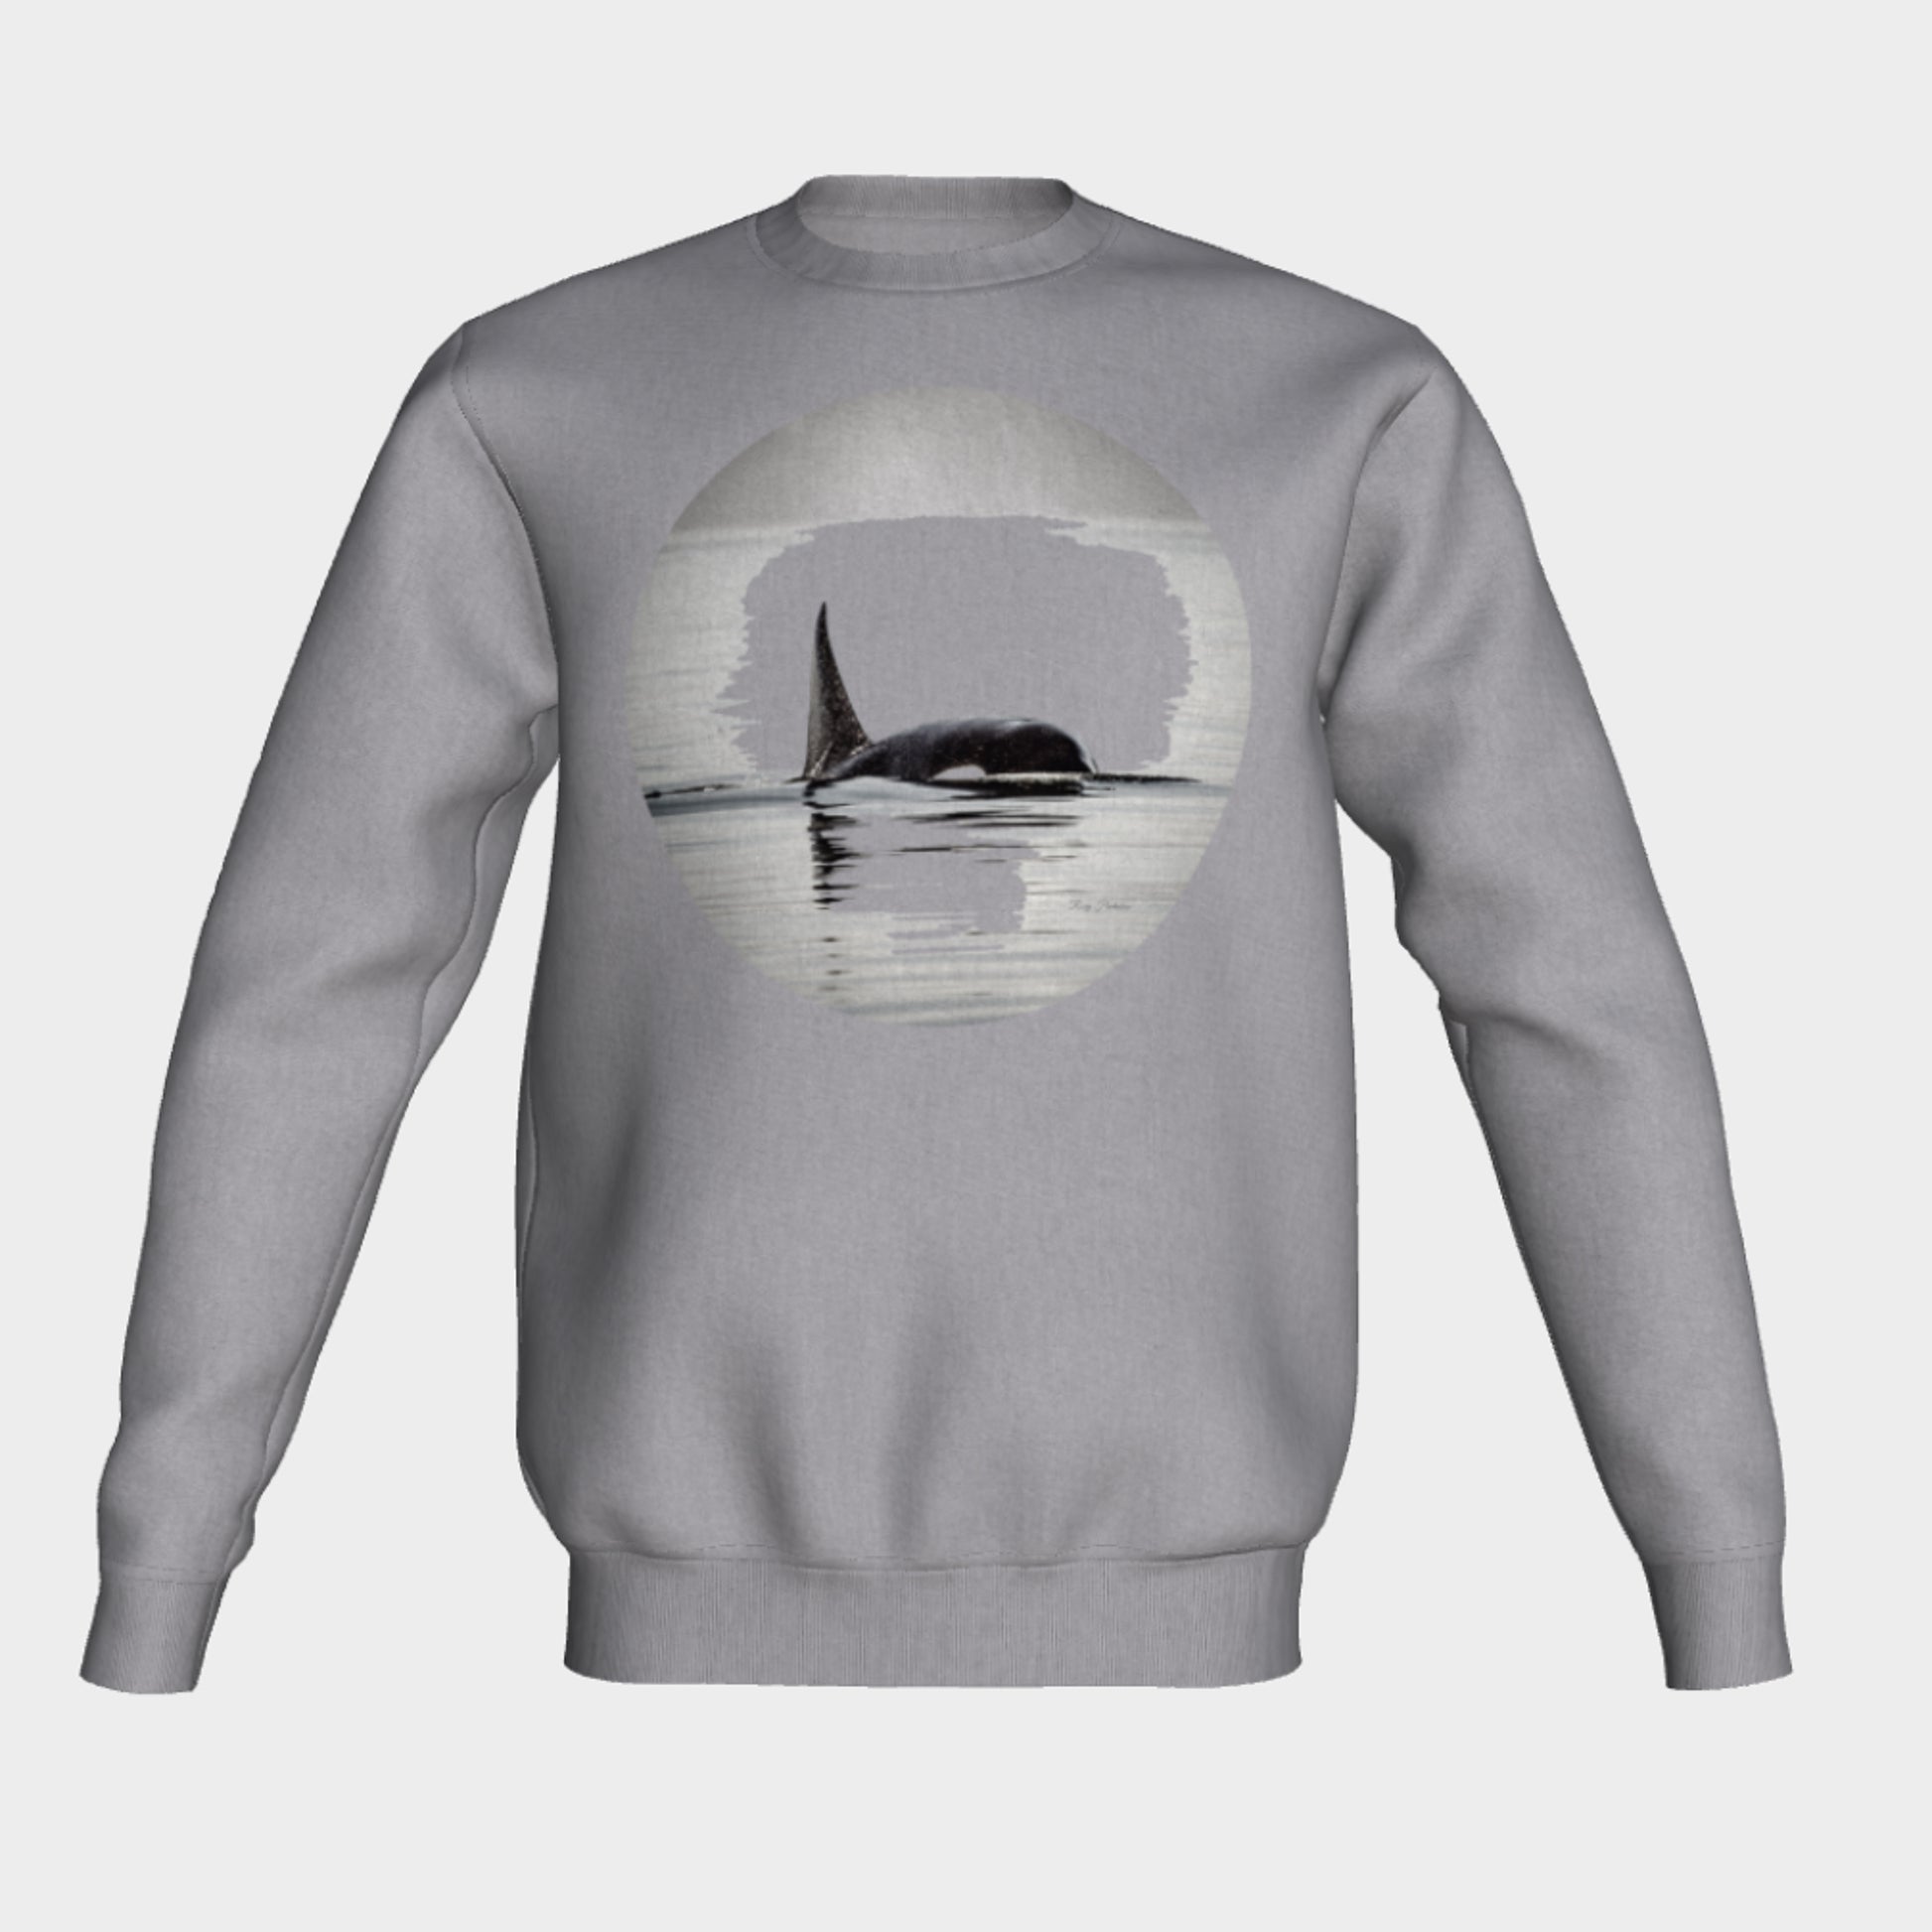 Orca Spray Crewneck Sweatshirt What’s better than a super cozy sweatshirt? A super cozy sweatshirt from Van Isle Goddess!  Super cozy unisex sweatshirt for those chilly days.  Excellent for men or women.   Fit is roomy and comfortable. 